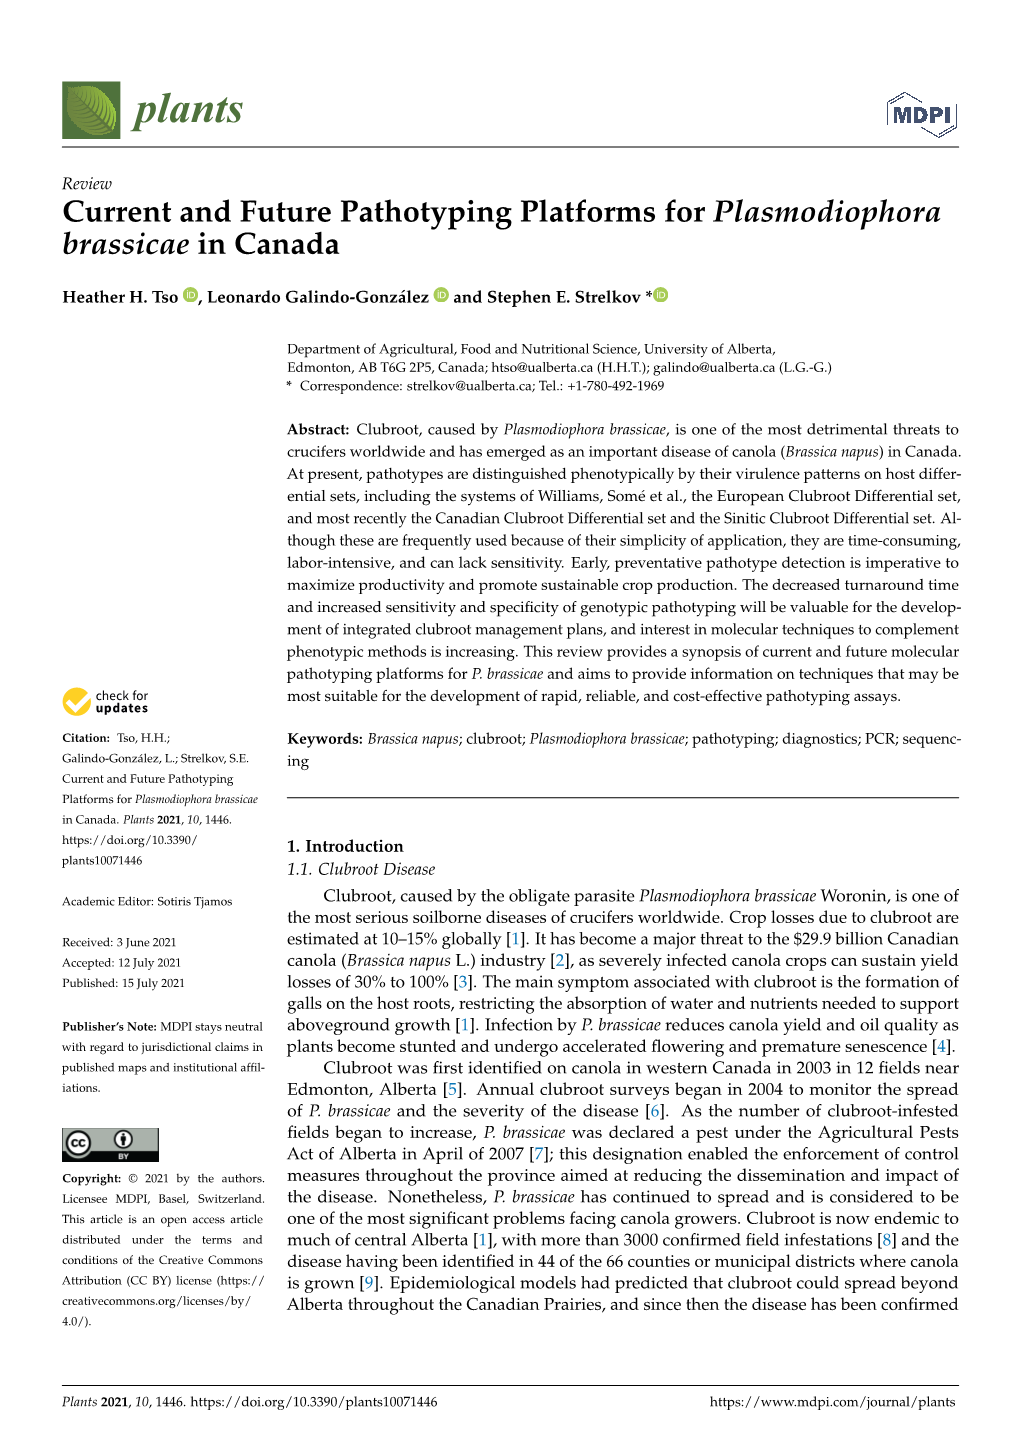 Current and Future Pathotyping Platforms for Plasmodiophora Brassicae in Canada